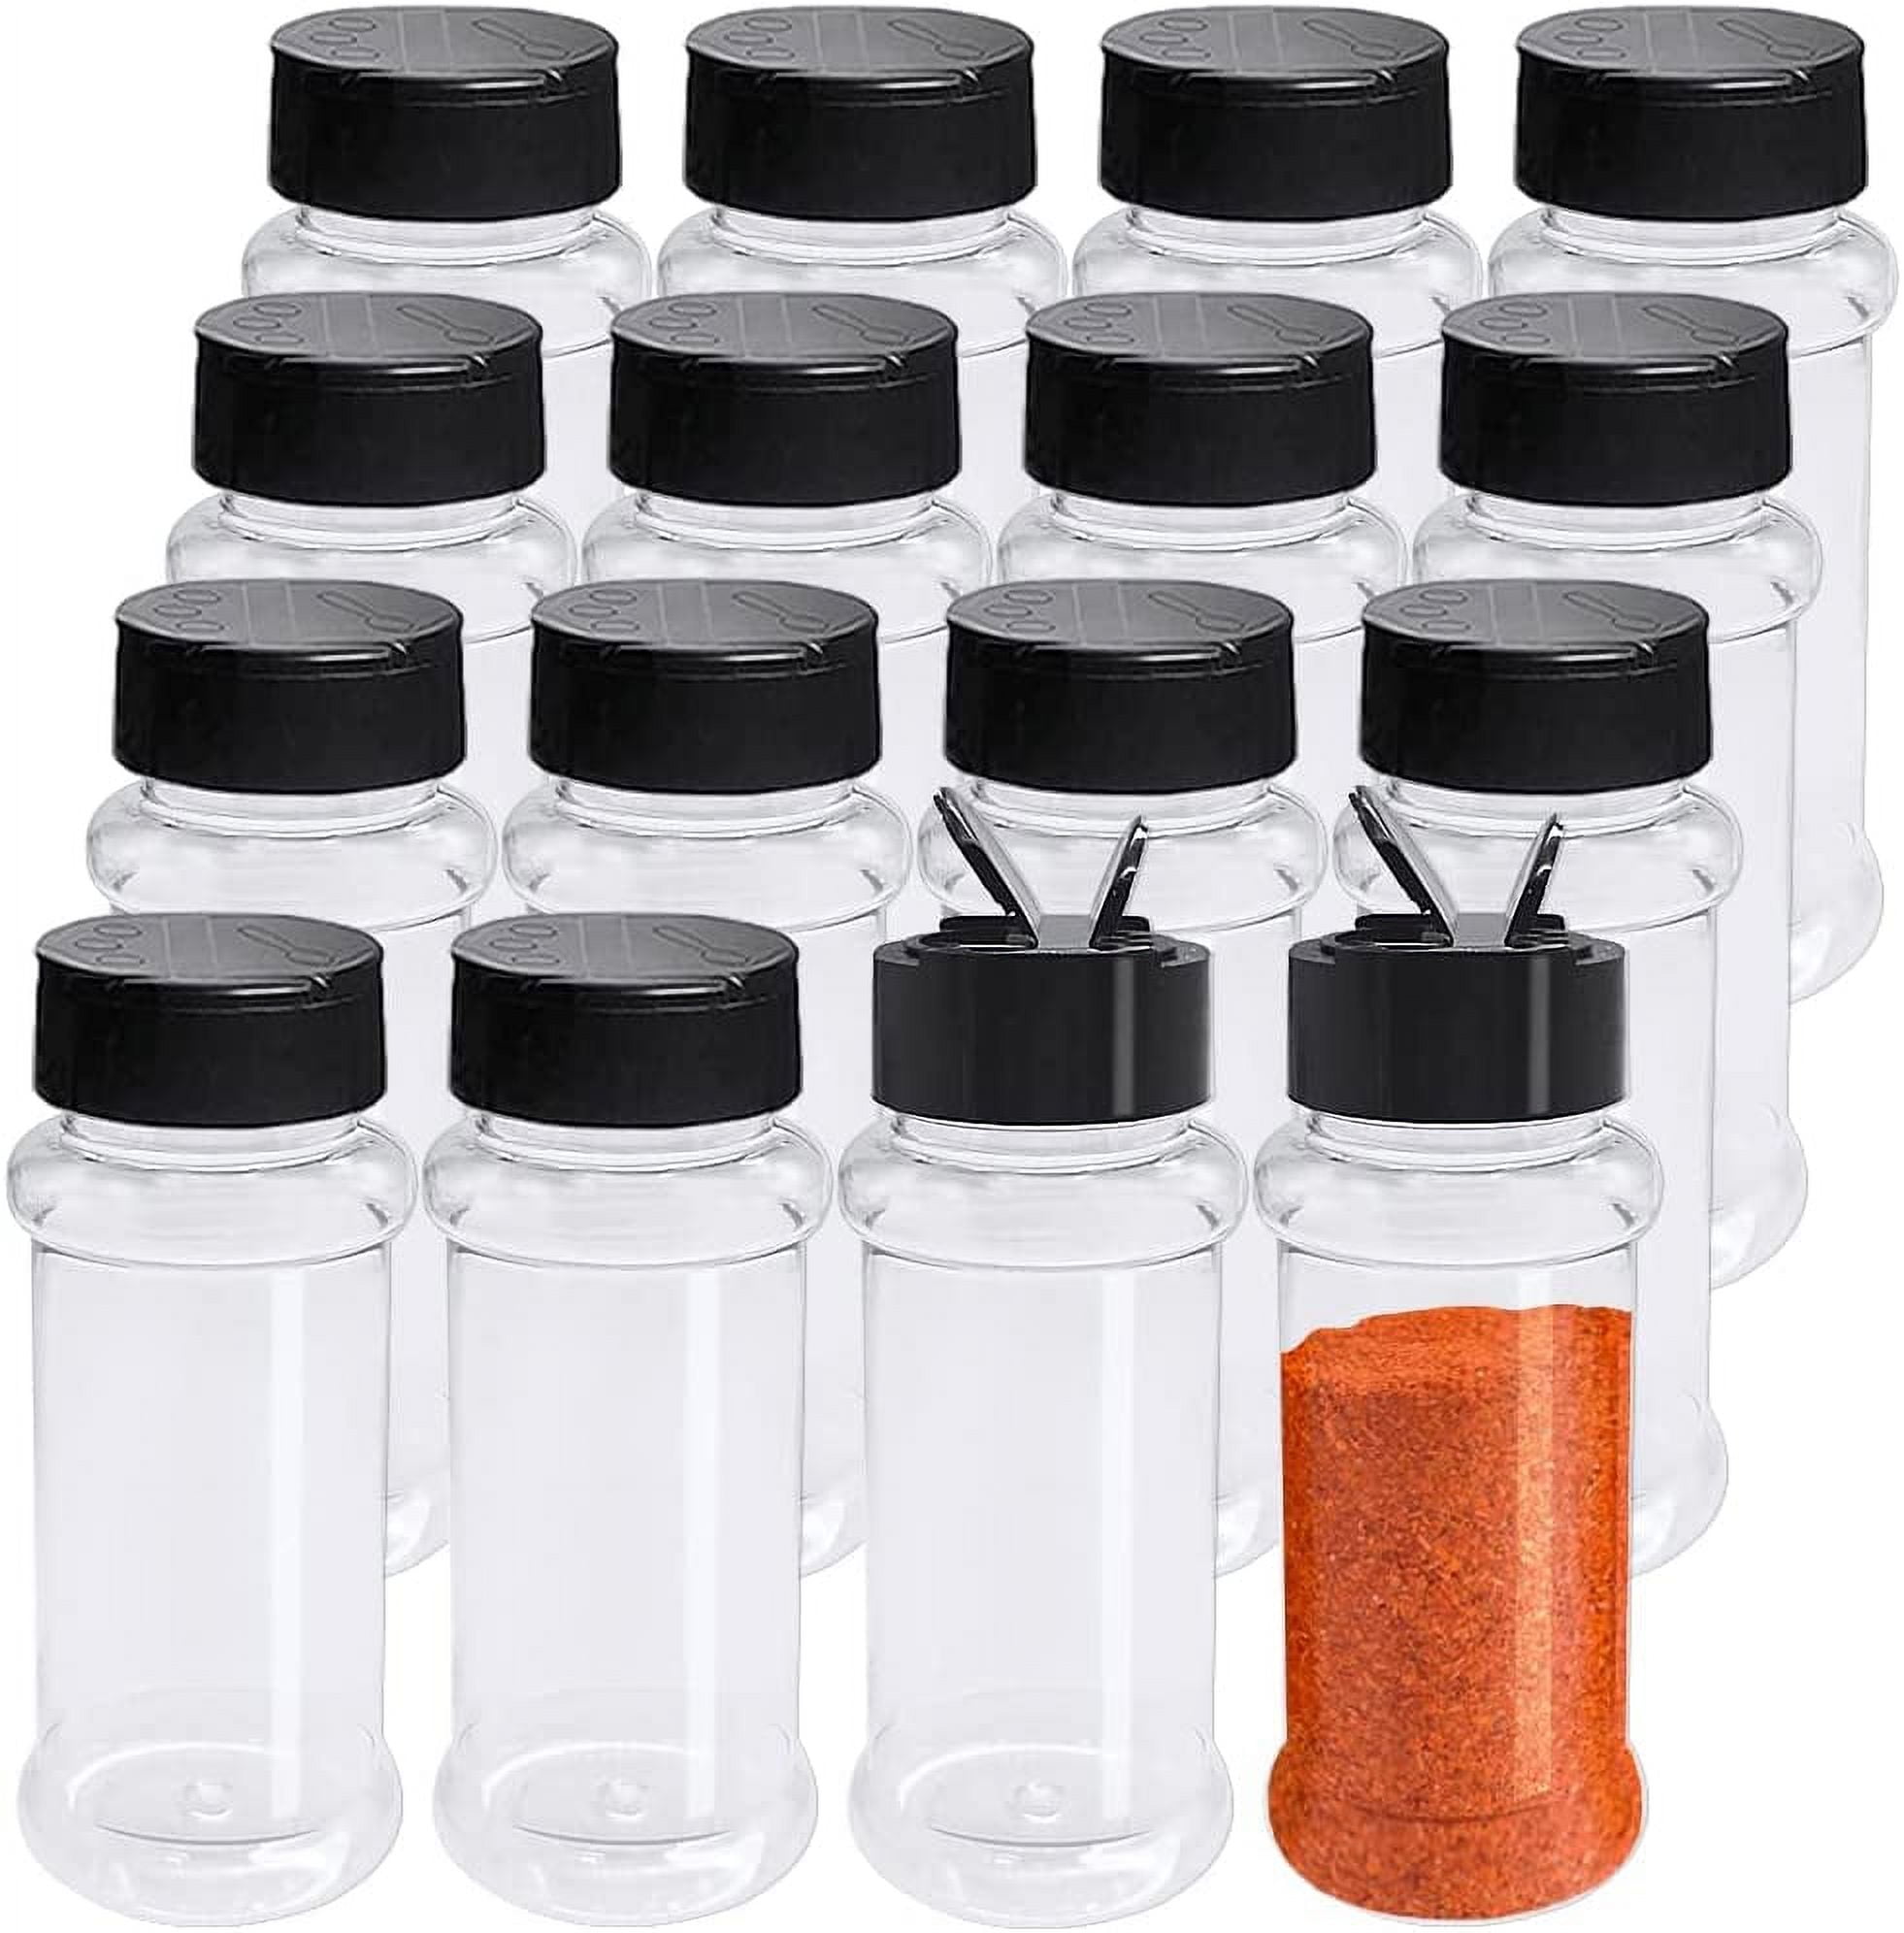 16 Pack 3.4oz/100ml Plastic Spice Bottles Set,Empty Seasoning Containers  with Black Cap,Clear Reusable Containers Jars for Spice,Herbs,Powders,Glitters  